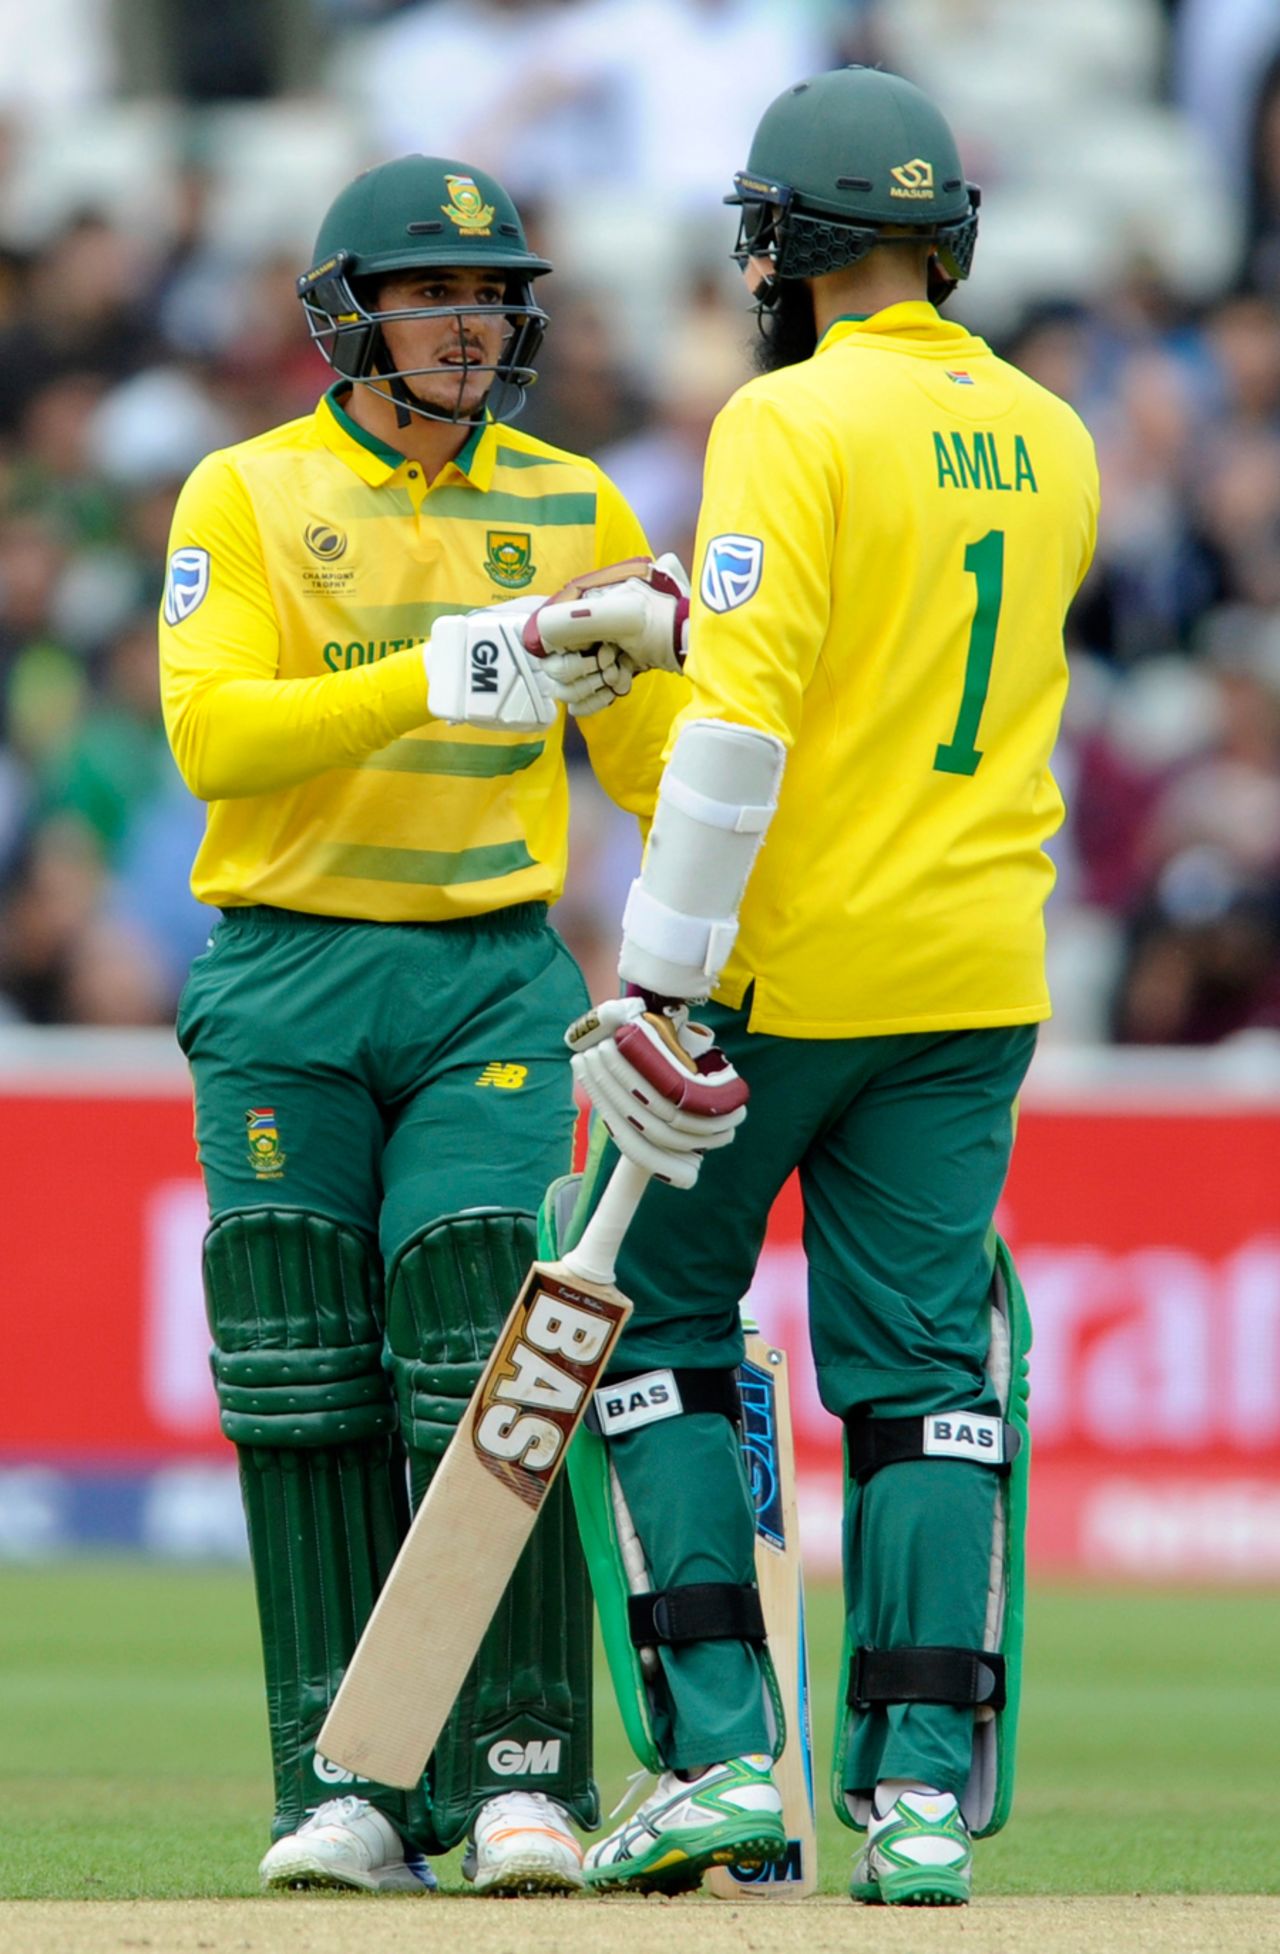 Quinton de Kock and Hashim Amla added 40 in 50 balls for the first wicket, Pakistan v South Africa, Champions Trophy, Group B, Edgbaston, June 7, 2017